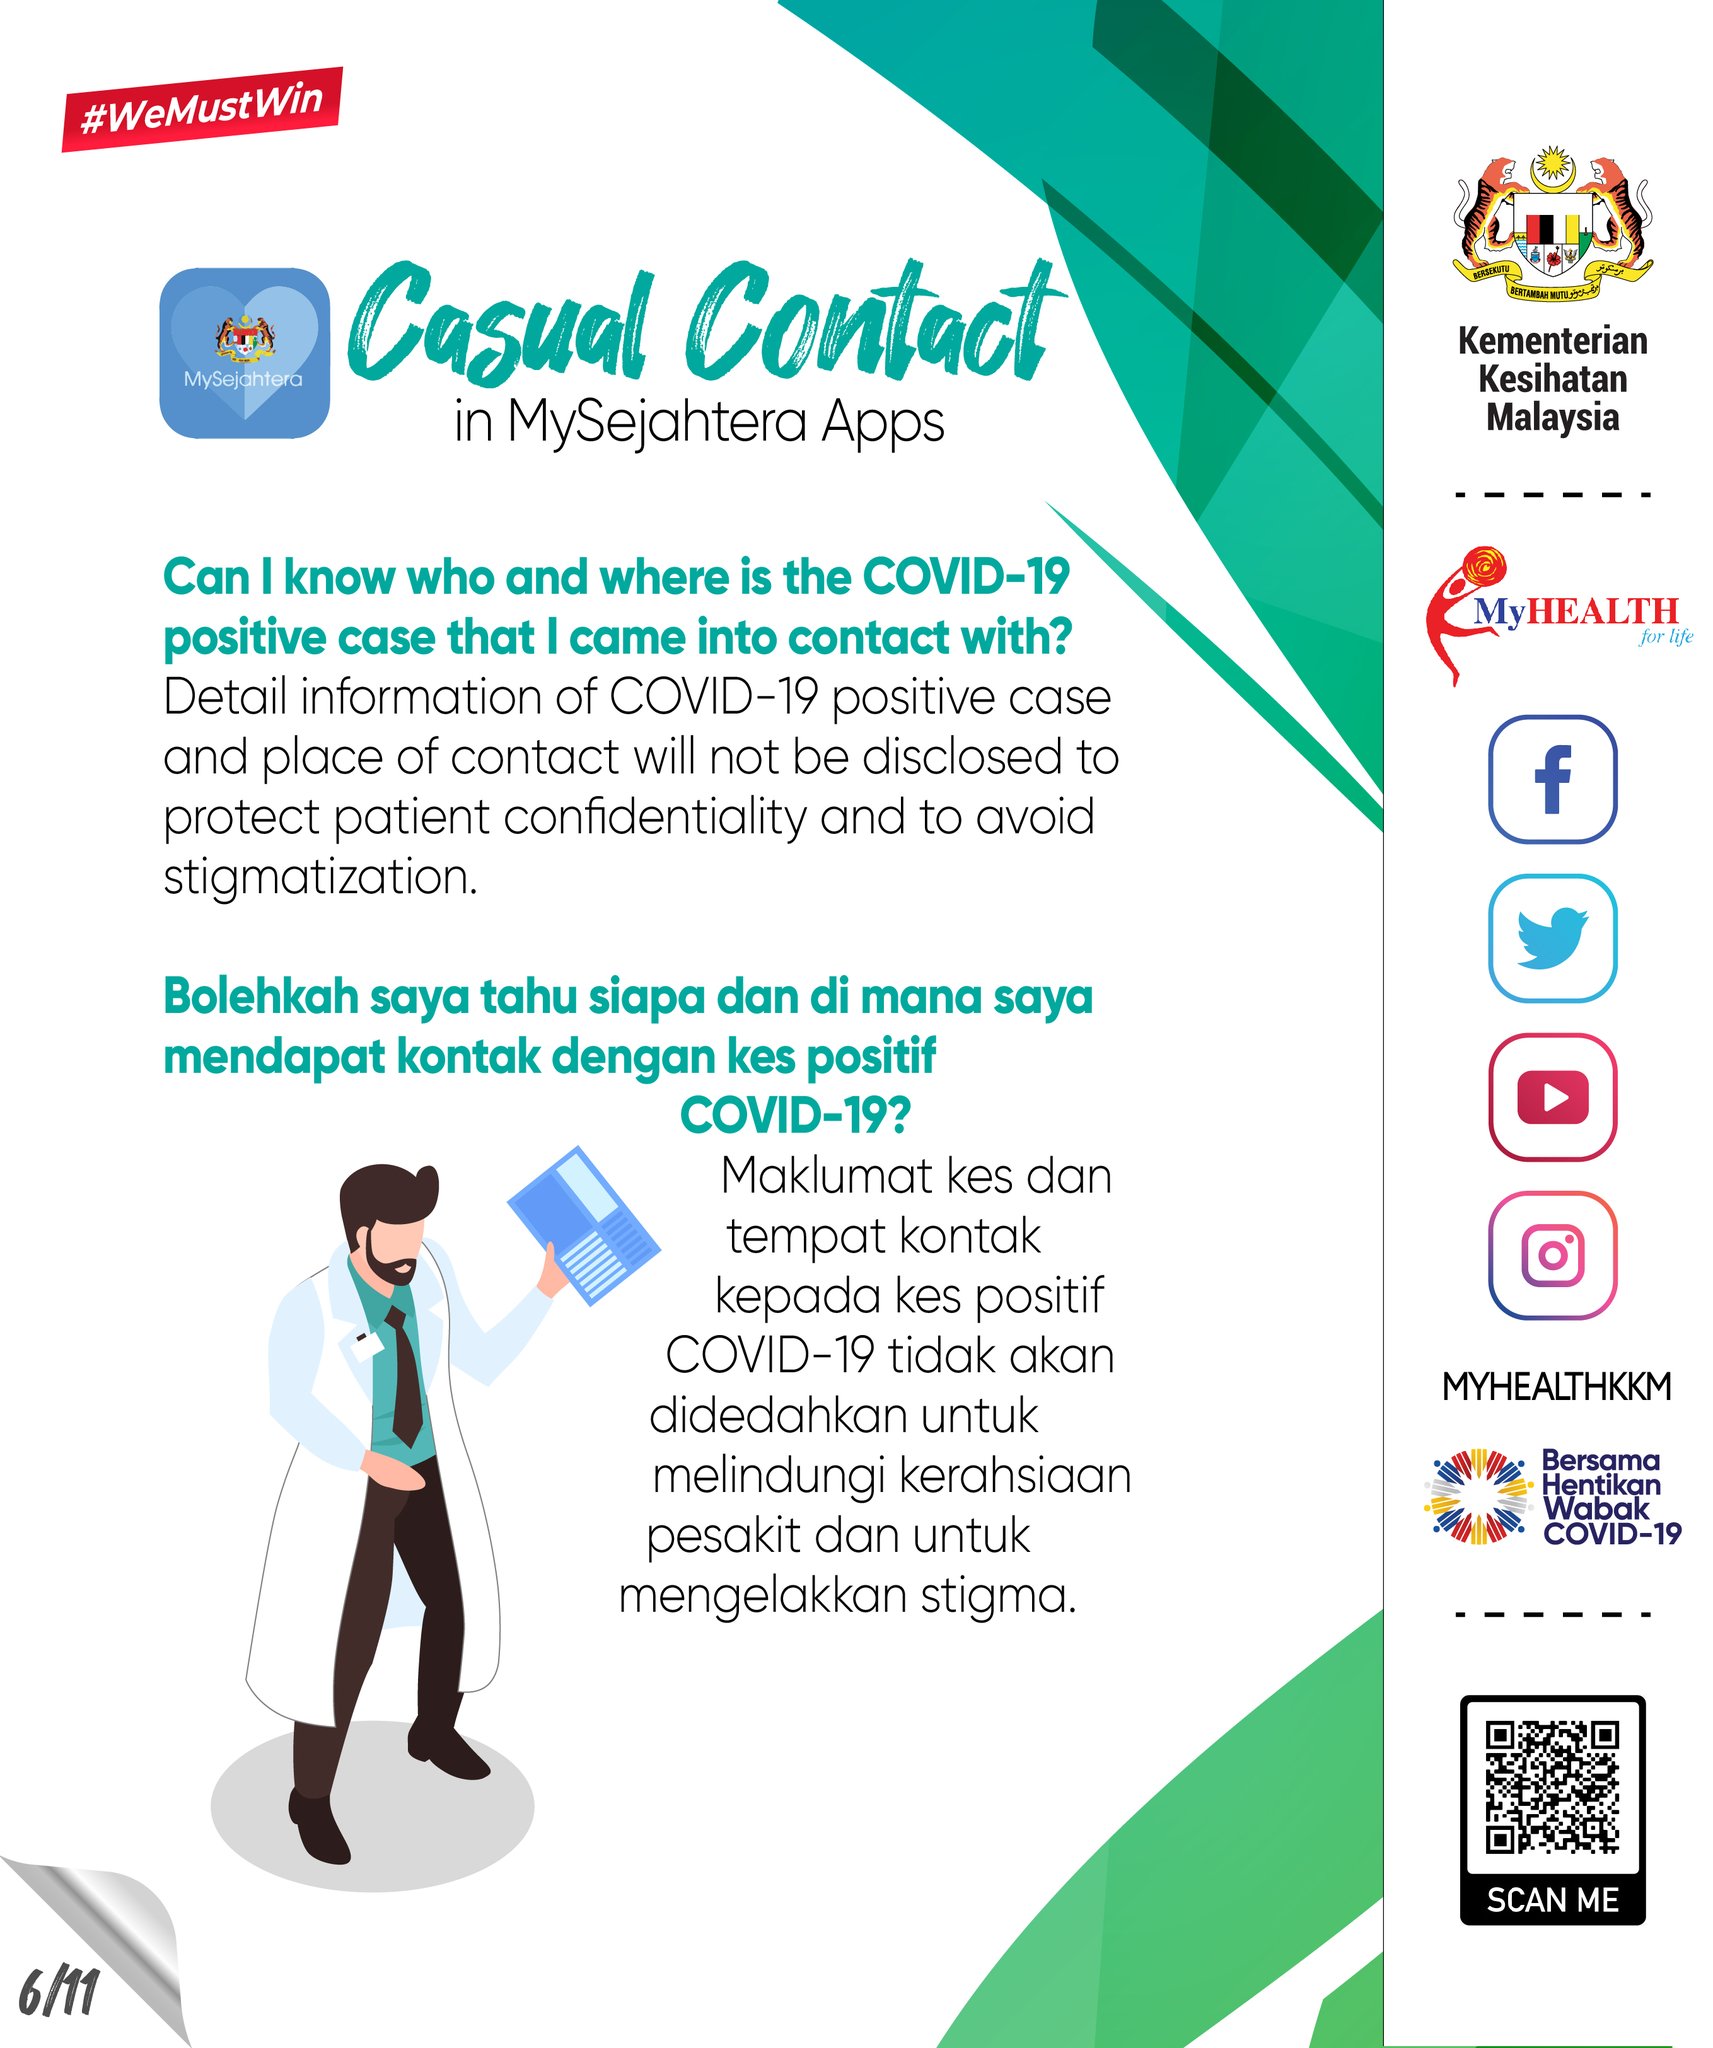 How to check casual contact location mysejahtera